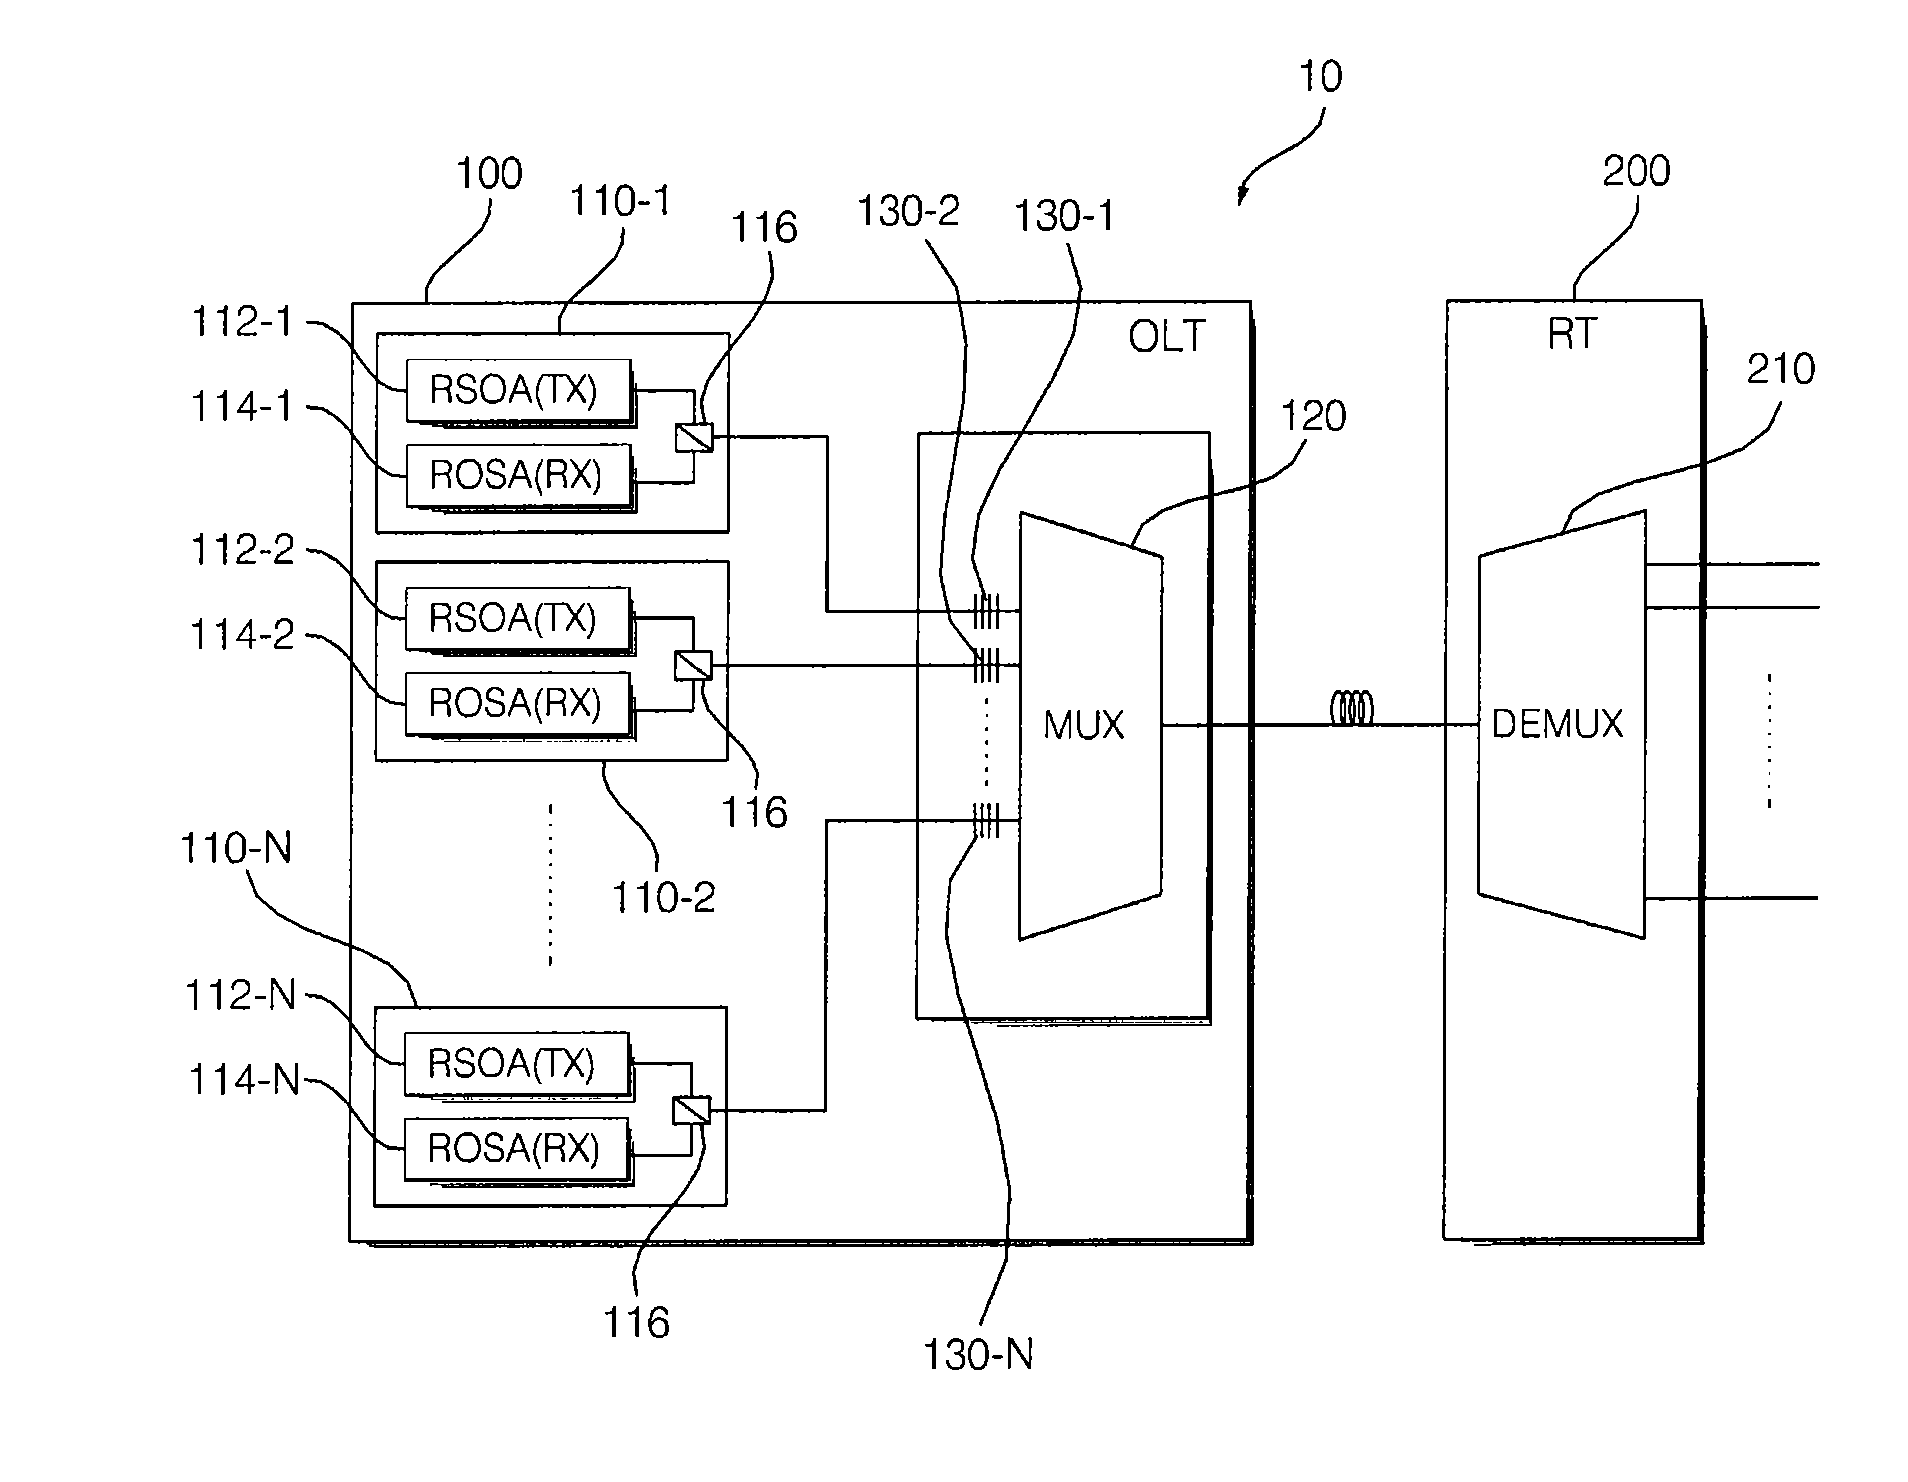 Wdm-pon system using self-injection locking, optical line terminal thereof, and data transmission method